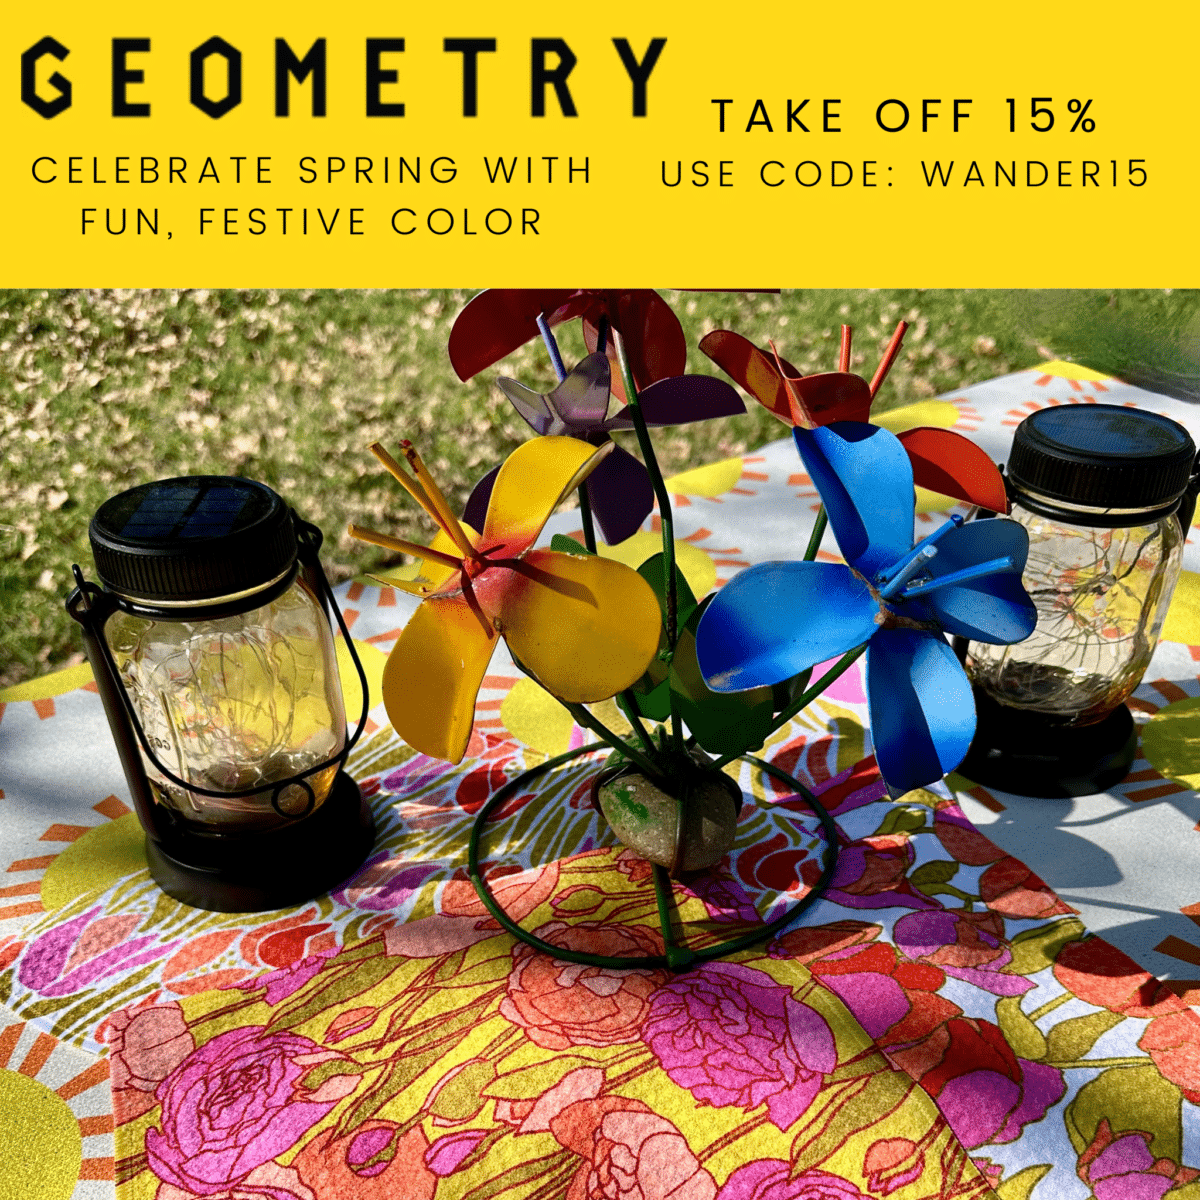 Colorful Geometry towels and picnic blanket